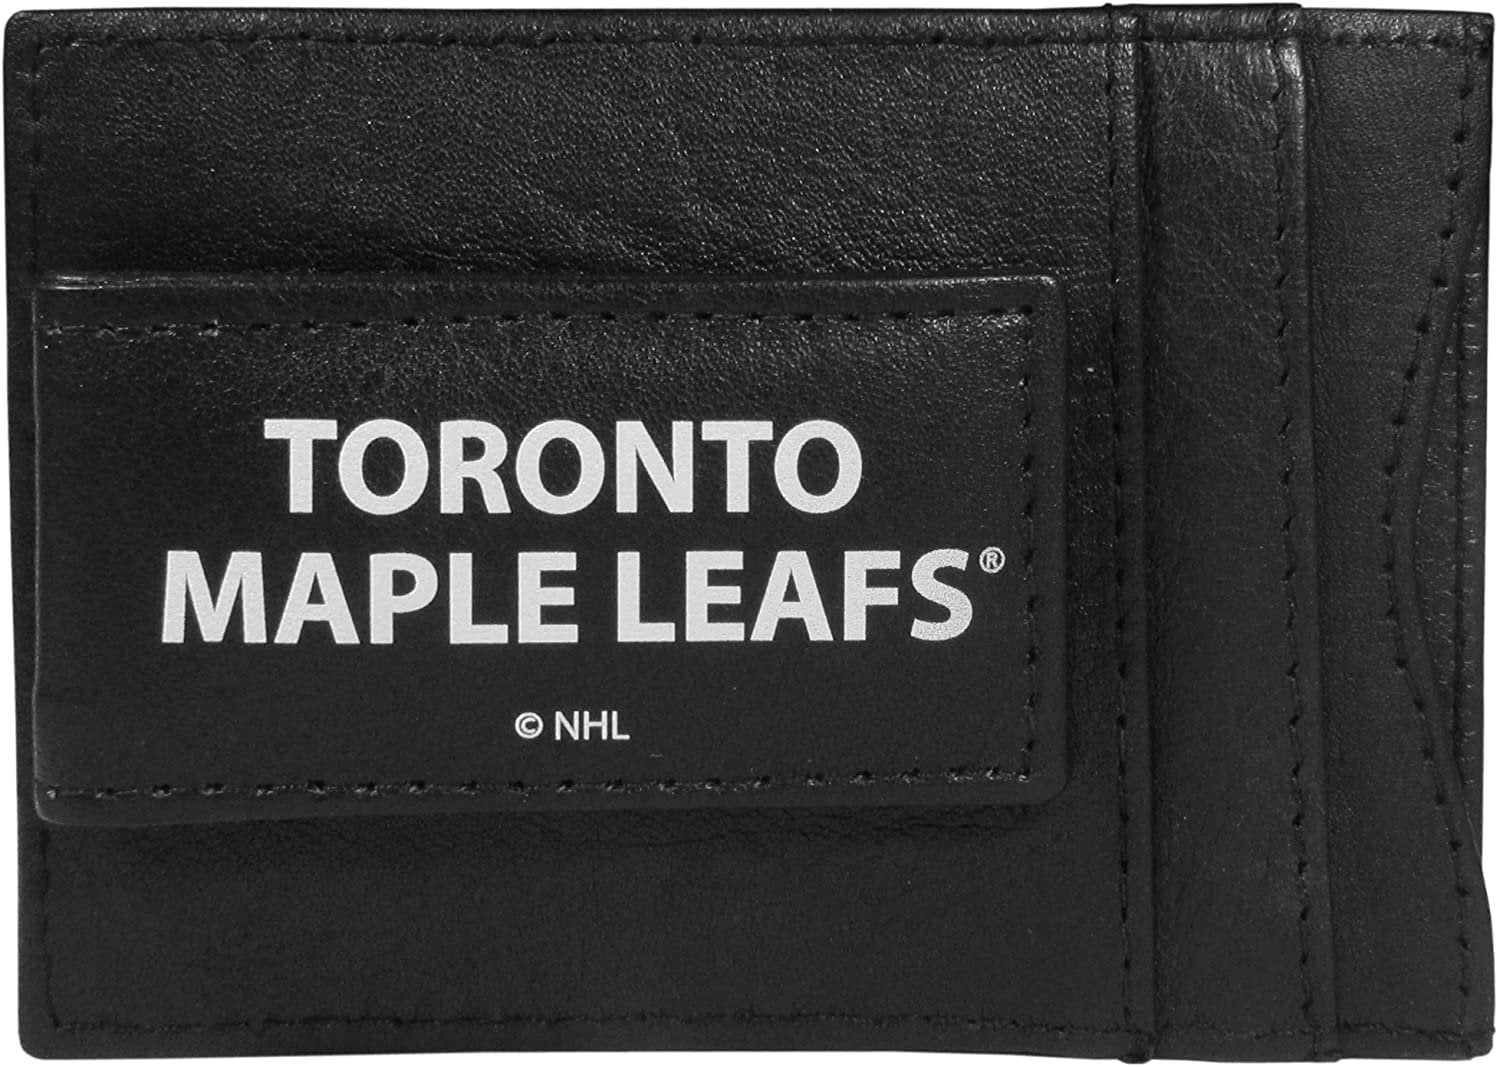 Toronto Maple Leafs Black Leather Wallet, Front Pocket Magnetic Money Clip, Printed Logo